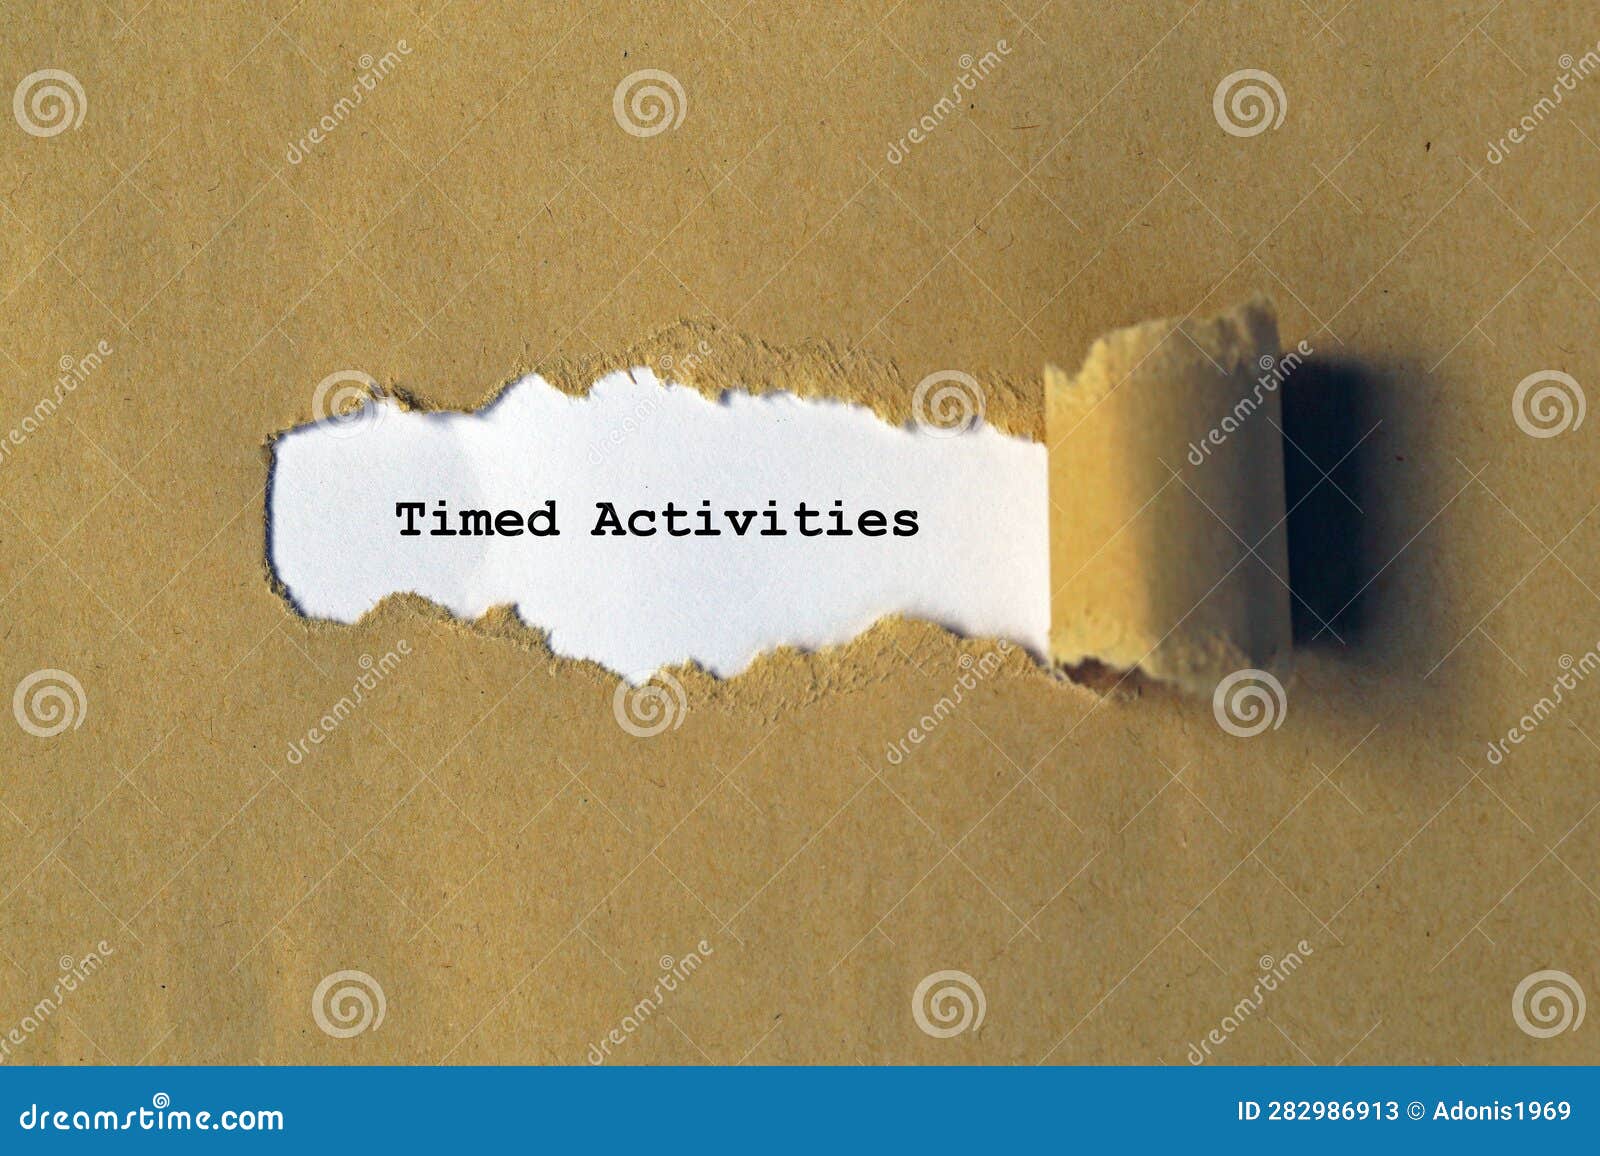 timed activities on white paper